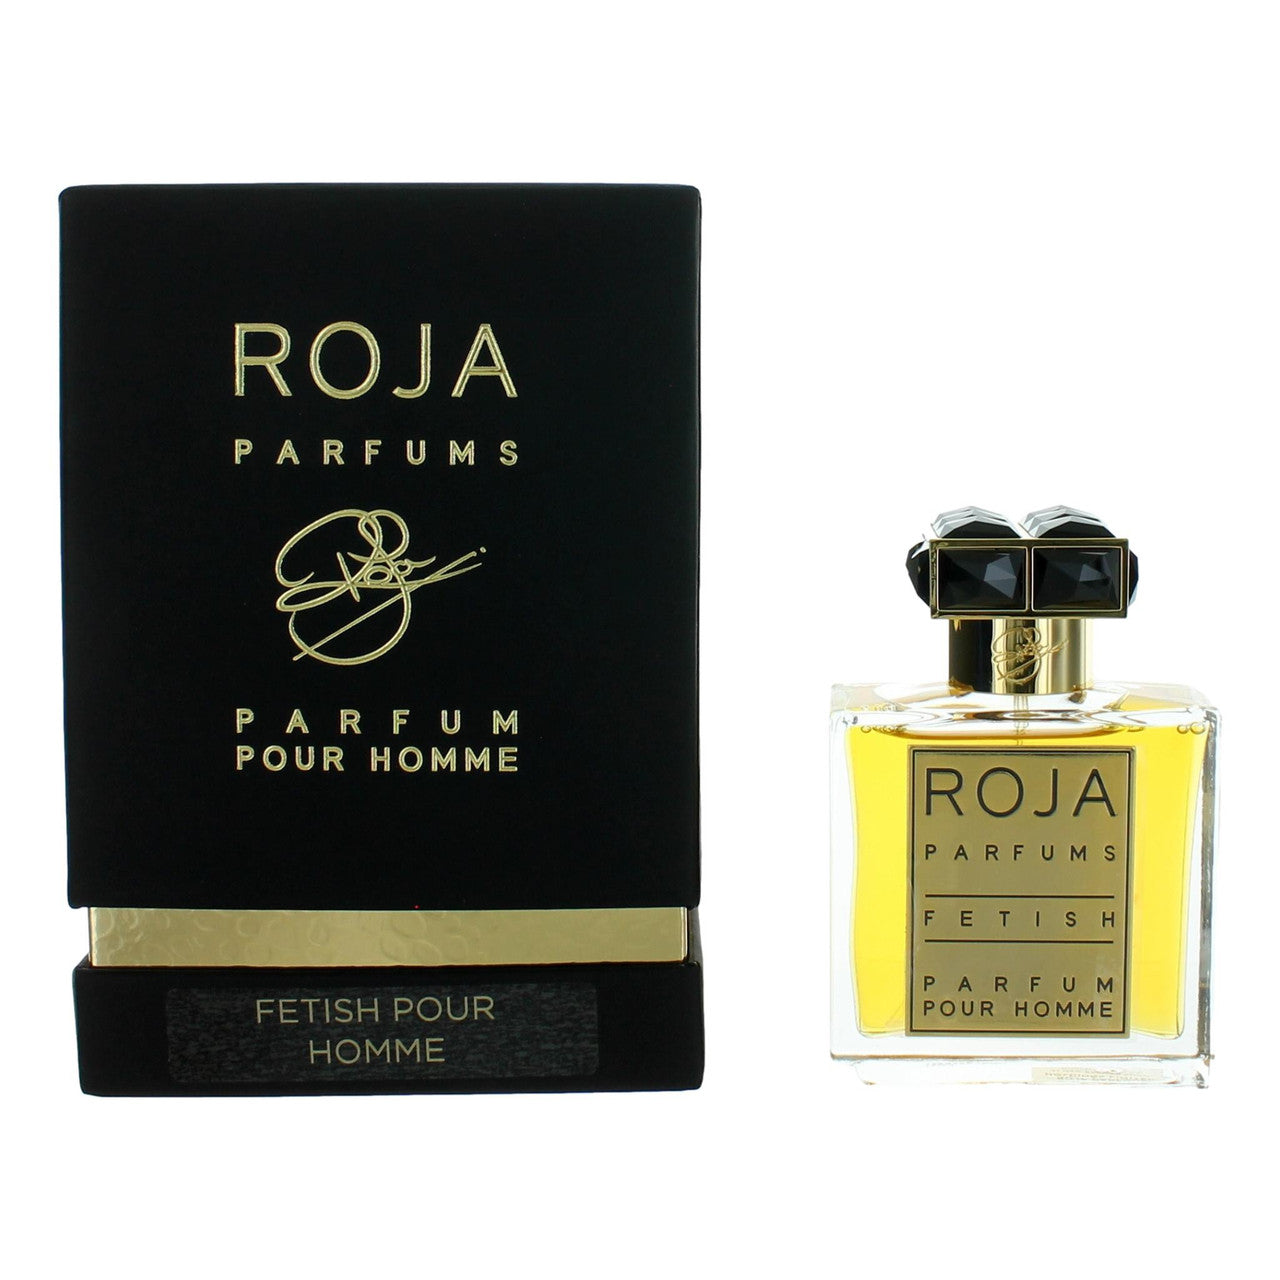 1.7 oz bottle of Fetish Pour Homme by Roja Parfums